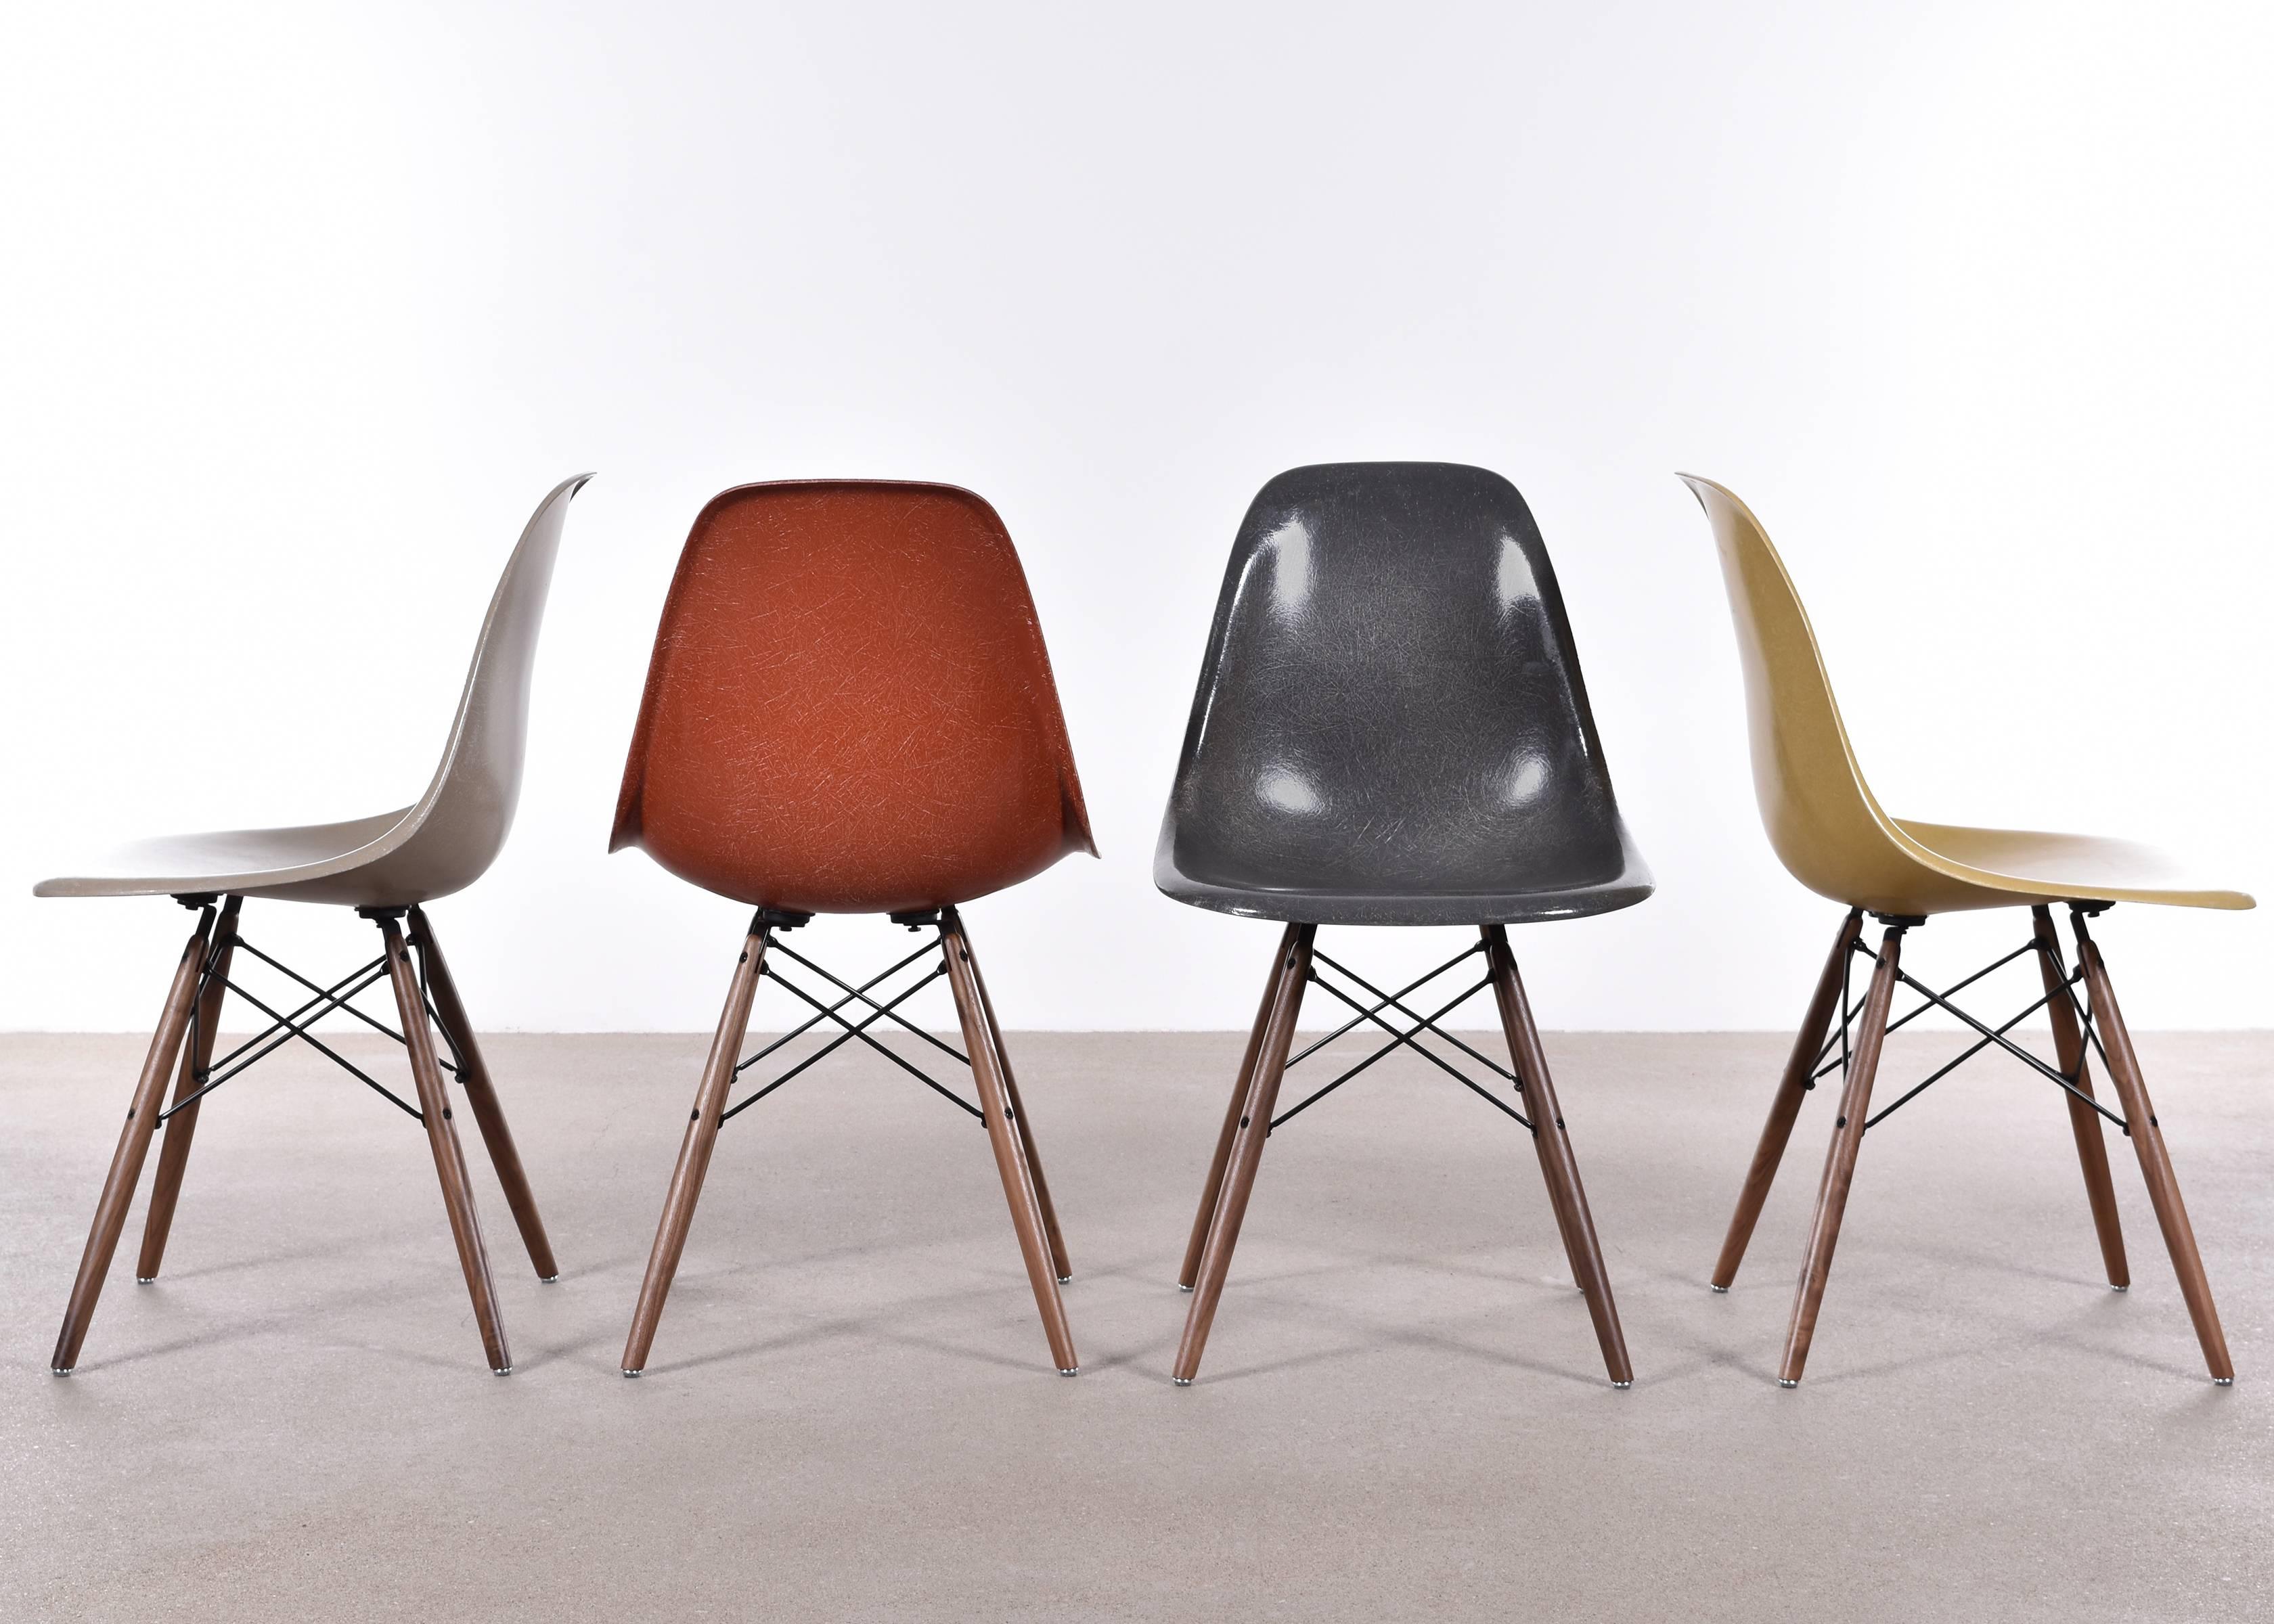 Beautiful iconic DSW chairs in colors: Elephant hide grey, terracotta, Ochre Light and Greige.
Shells are in very good or excellent condition with only slight traces of use. Replaced shock mounts which guarantee save usability for the next decades.